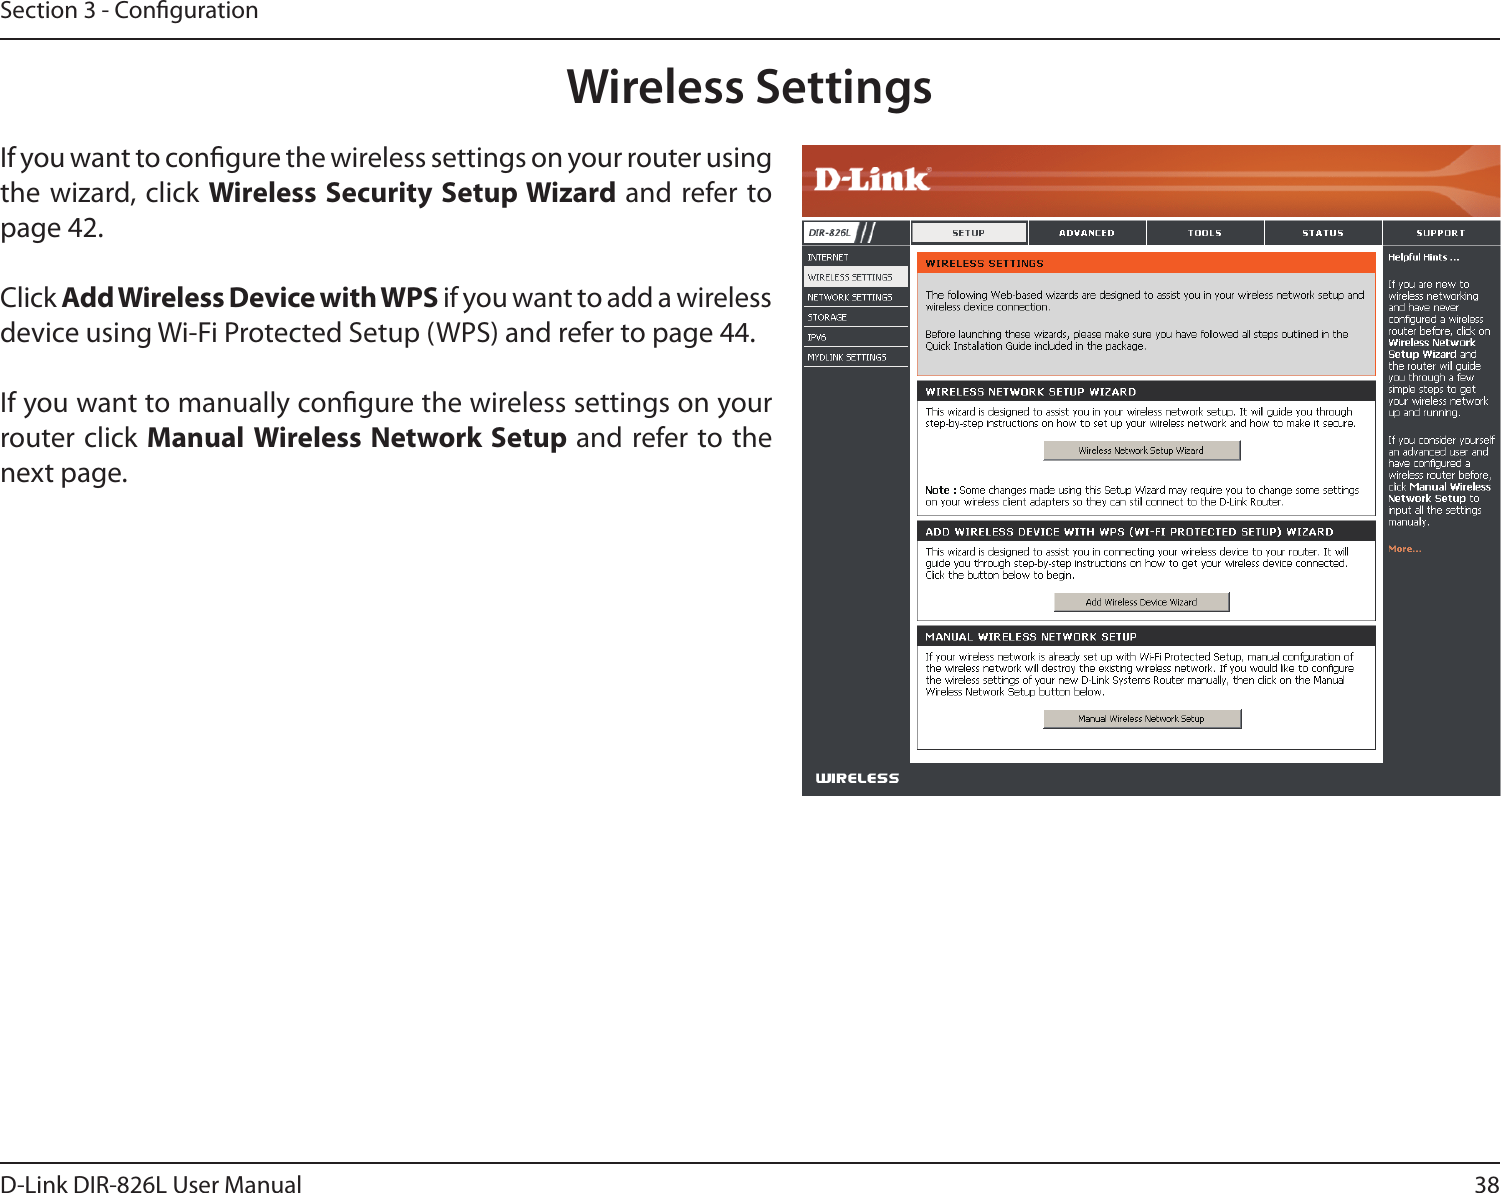 38D-Link DIR-826L User ManualSection 3 - CongurationWireless SettingsIf you want to congure the wireless settings on your router using the wizard, click  Wireless Security Setup Wizard and refer to page 42.Click Add Wireless Device with WPS if you want to add a wireless device using Wi-Fi Protected Setup (WPS) and refer to page 44.If you want to manually congure the wireless settings on your router click Manual Wireless Network Setup and refer to the next page.